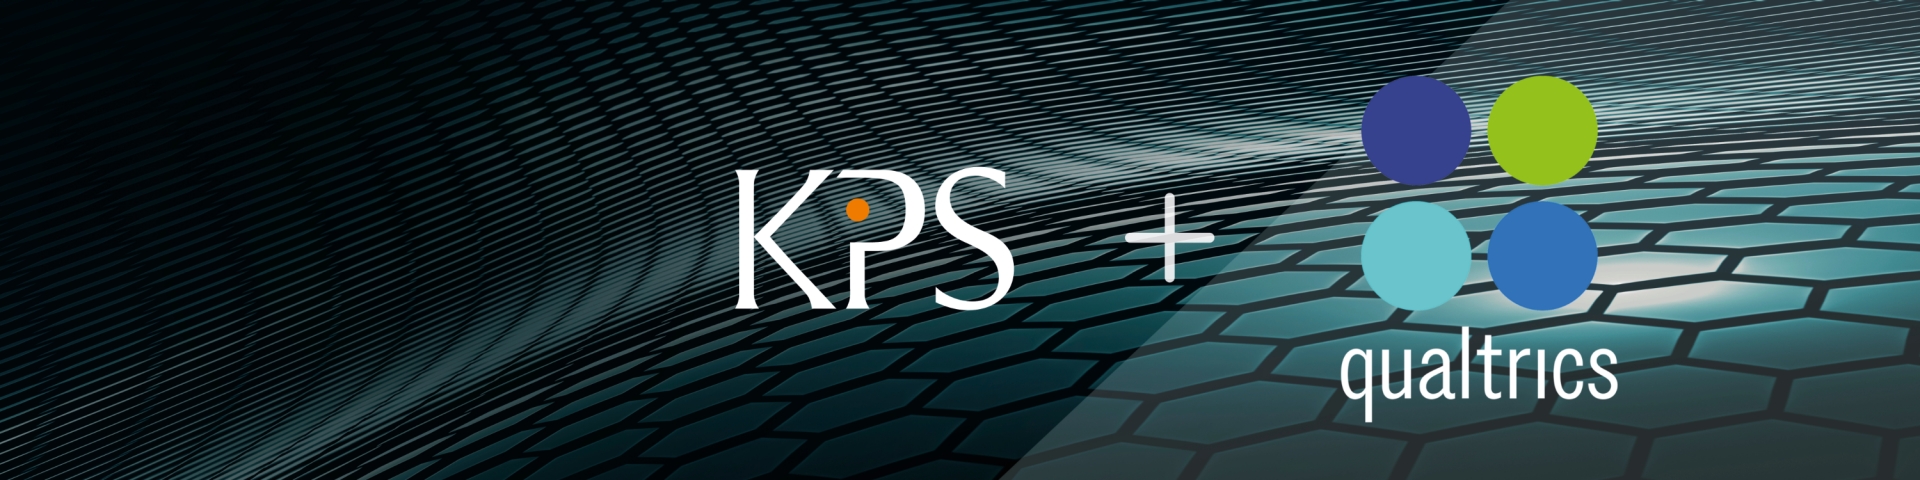 Logos of KPS and Qualtrics on an abstract background